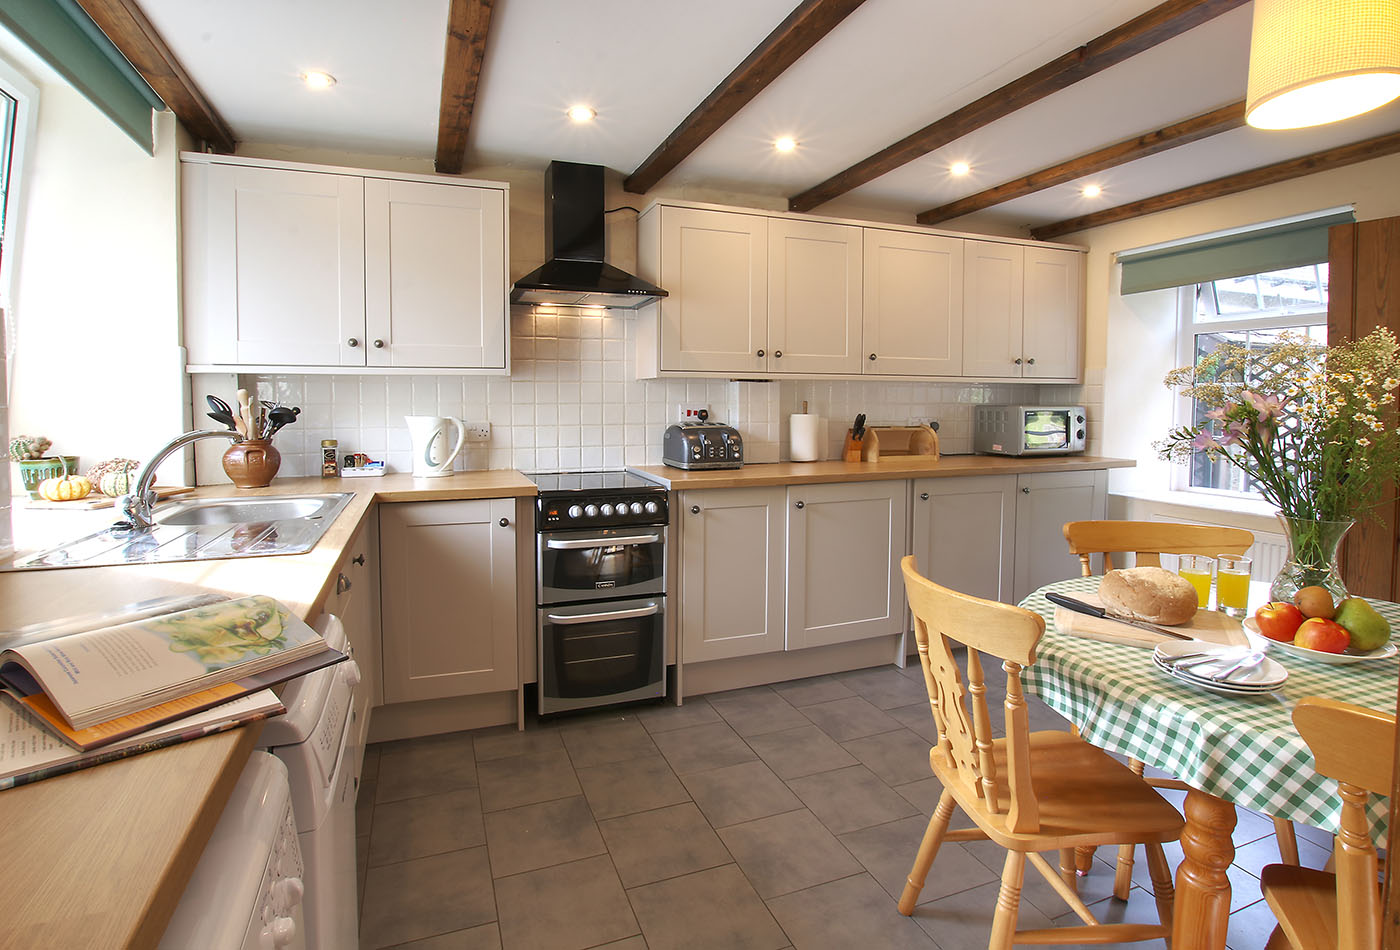 neighbouring-holiday-cottages-kitchen-one